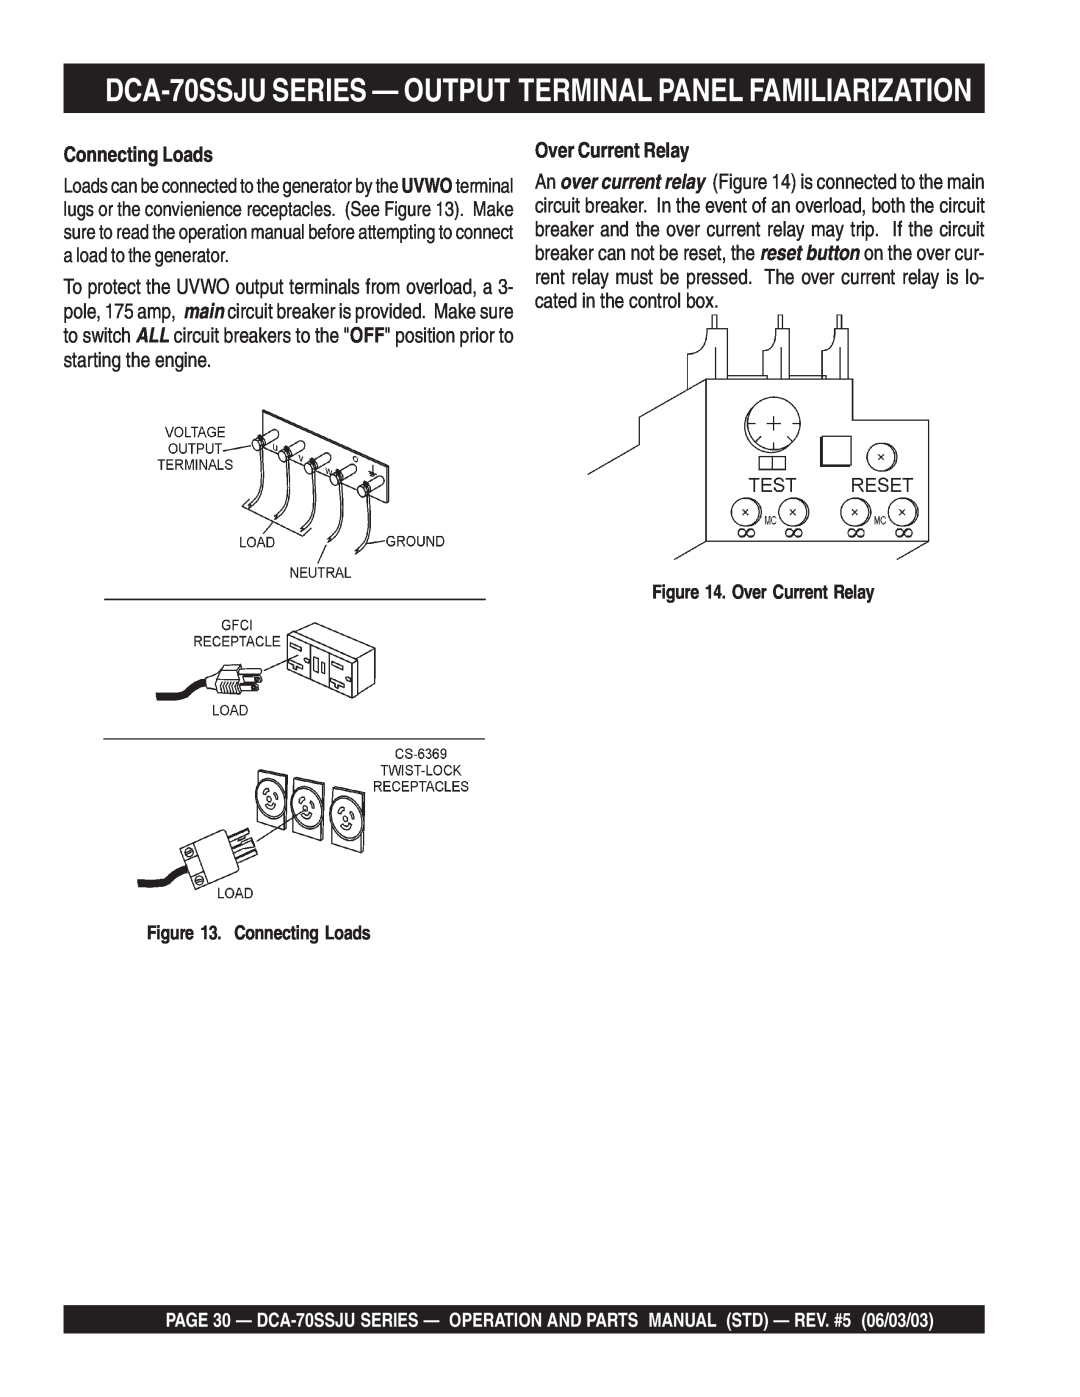 Multiquip DCA-70SSJU operation manual Connecting Loads, Over Current Relay 